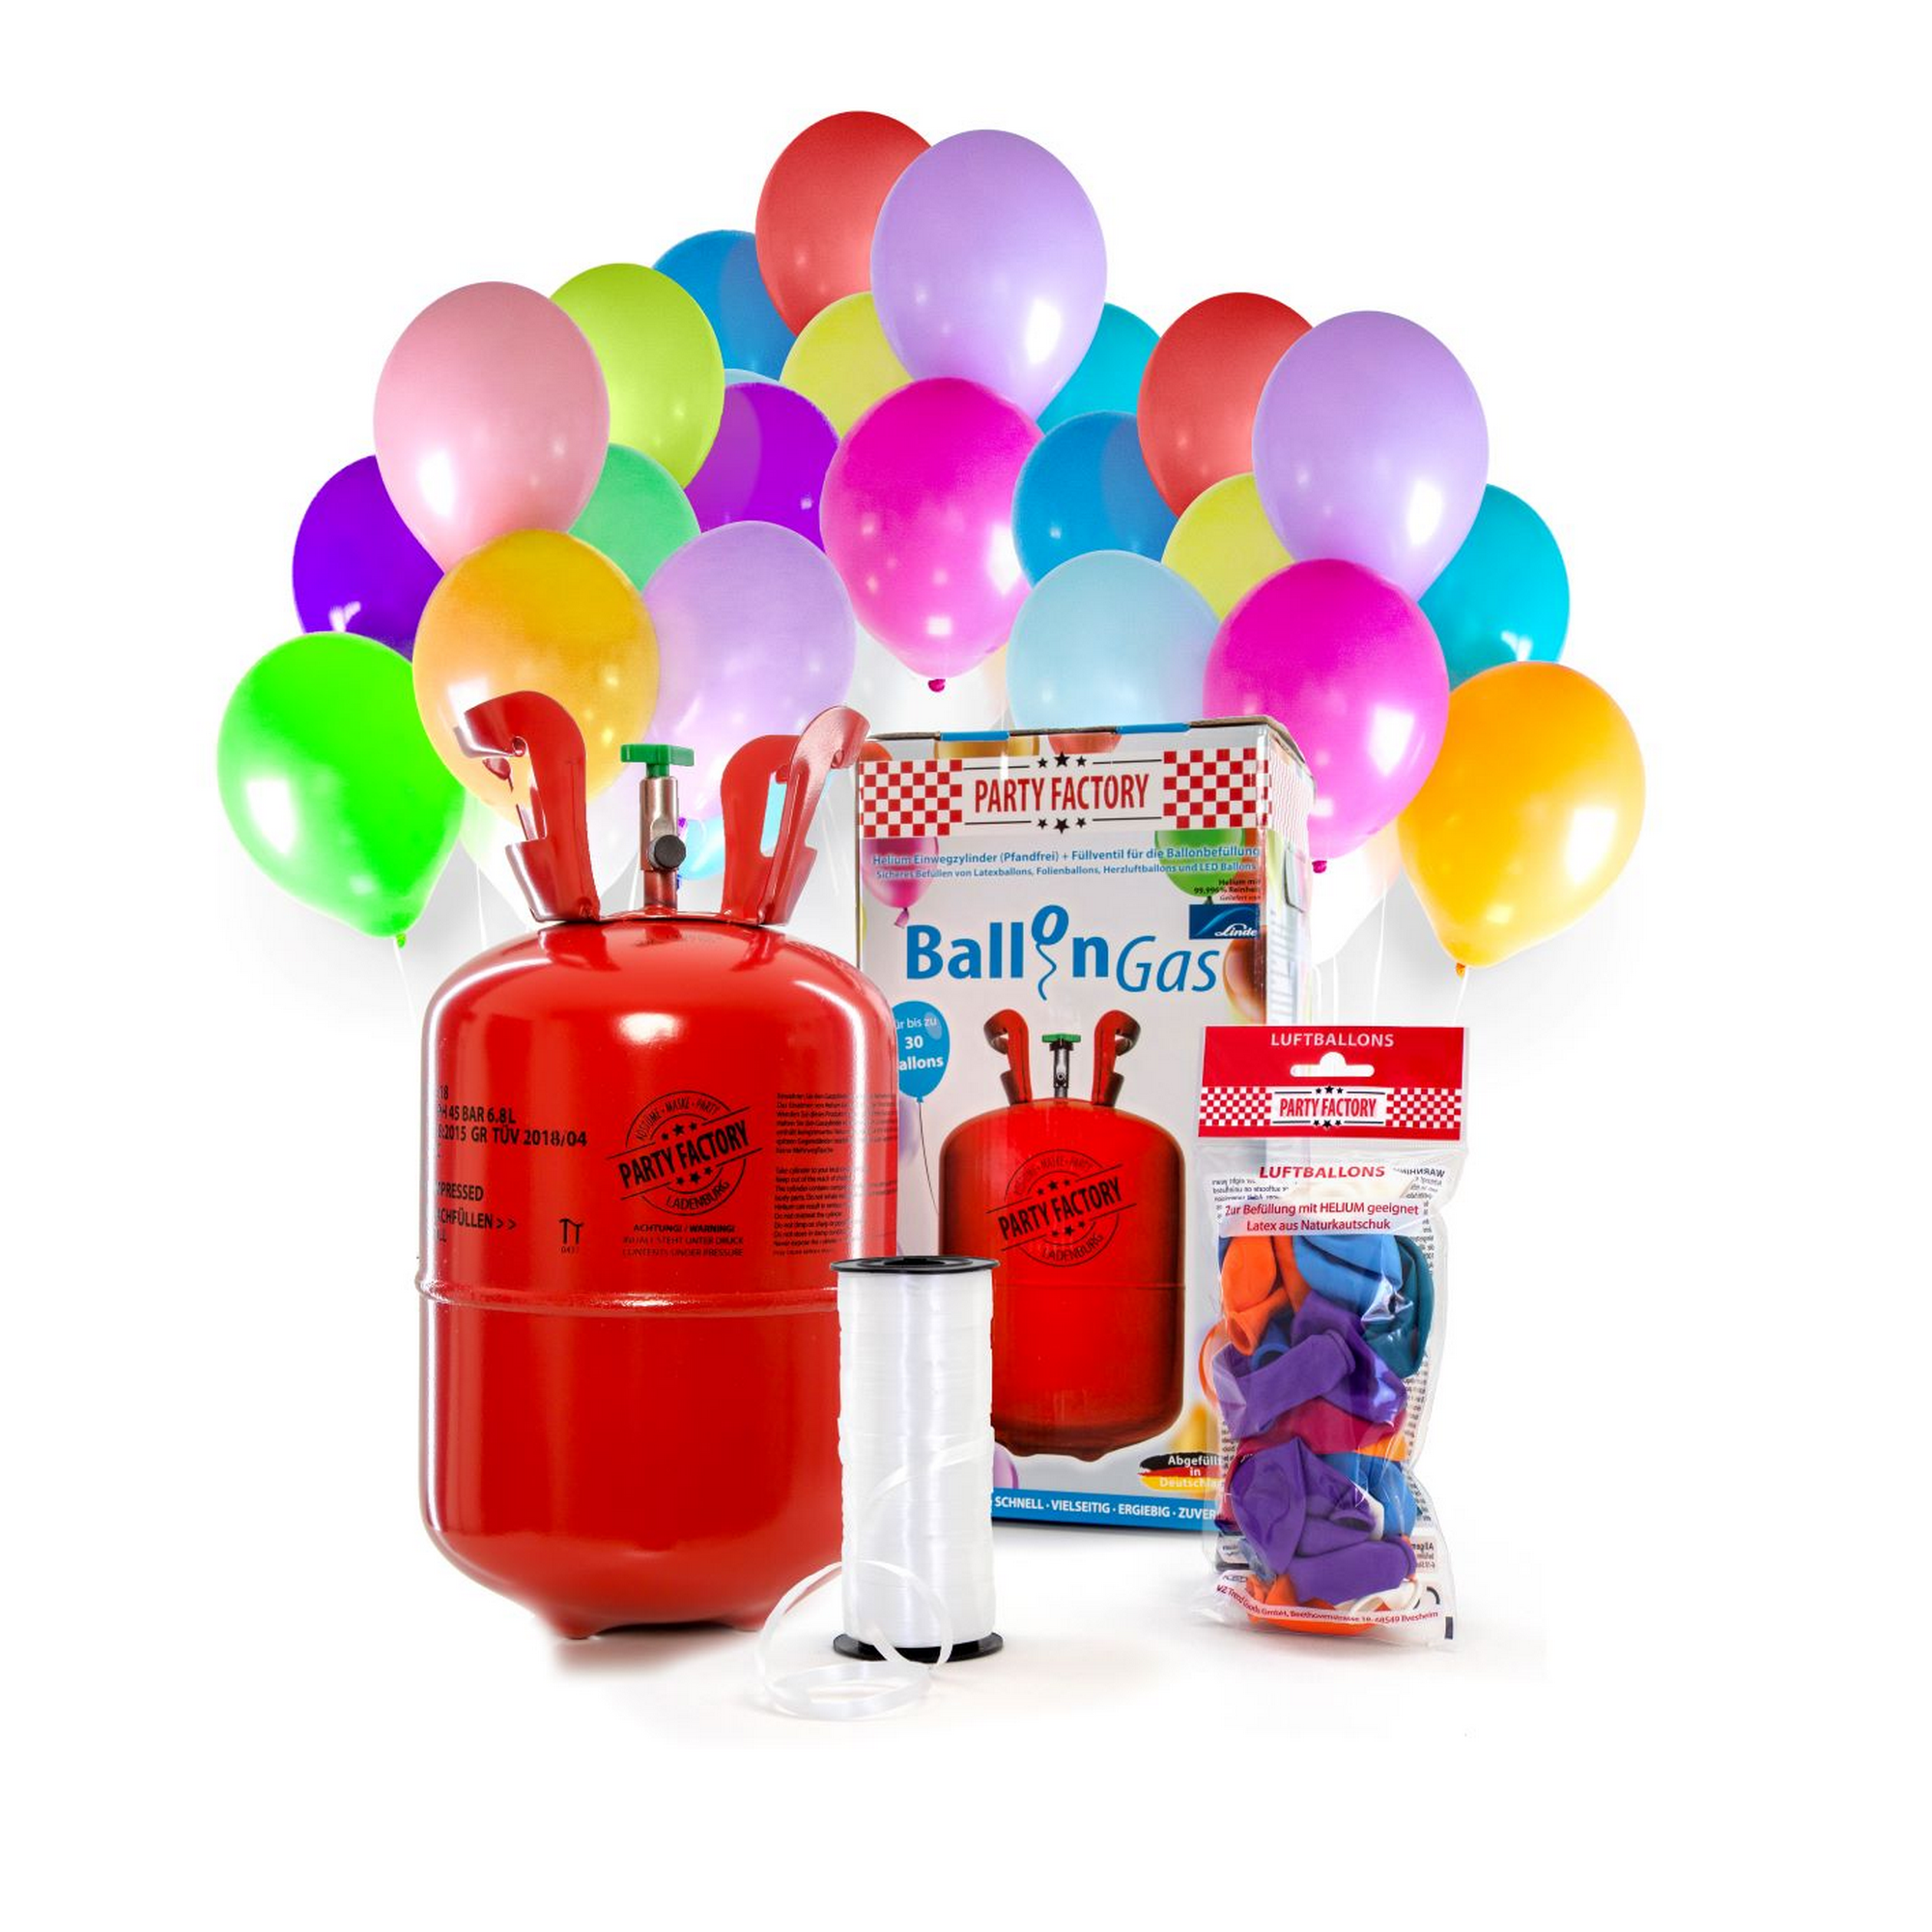 Ballongas-Helium 0,2 m³ inklusive 30 Latexballons + product picture